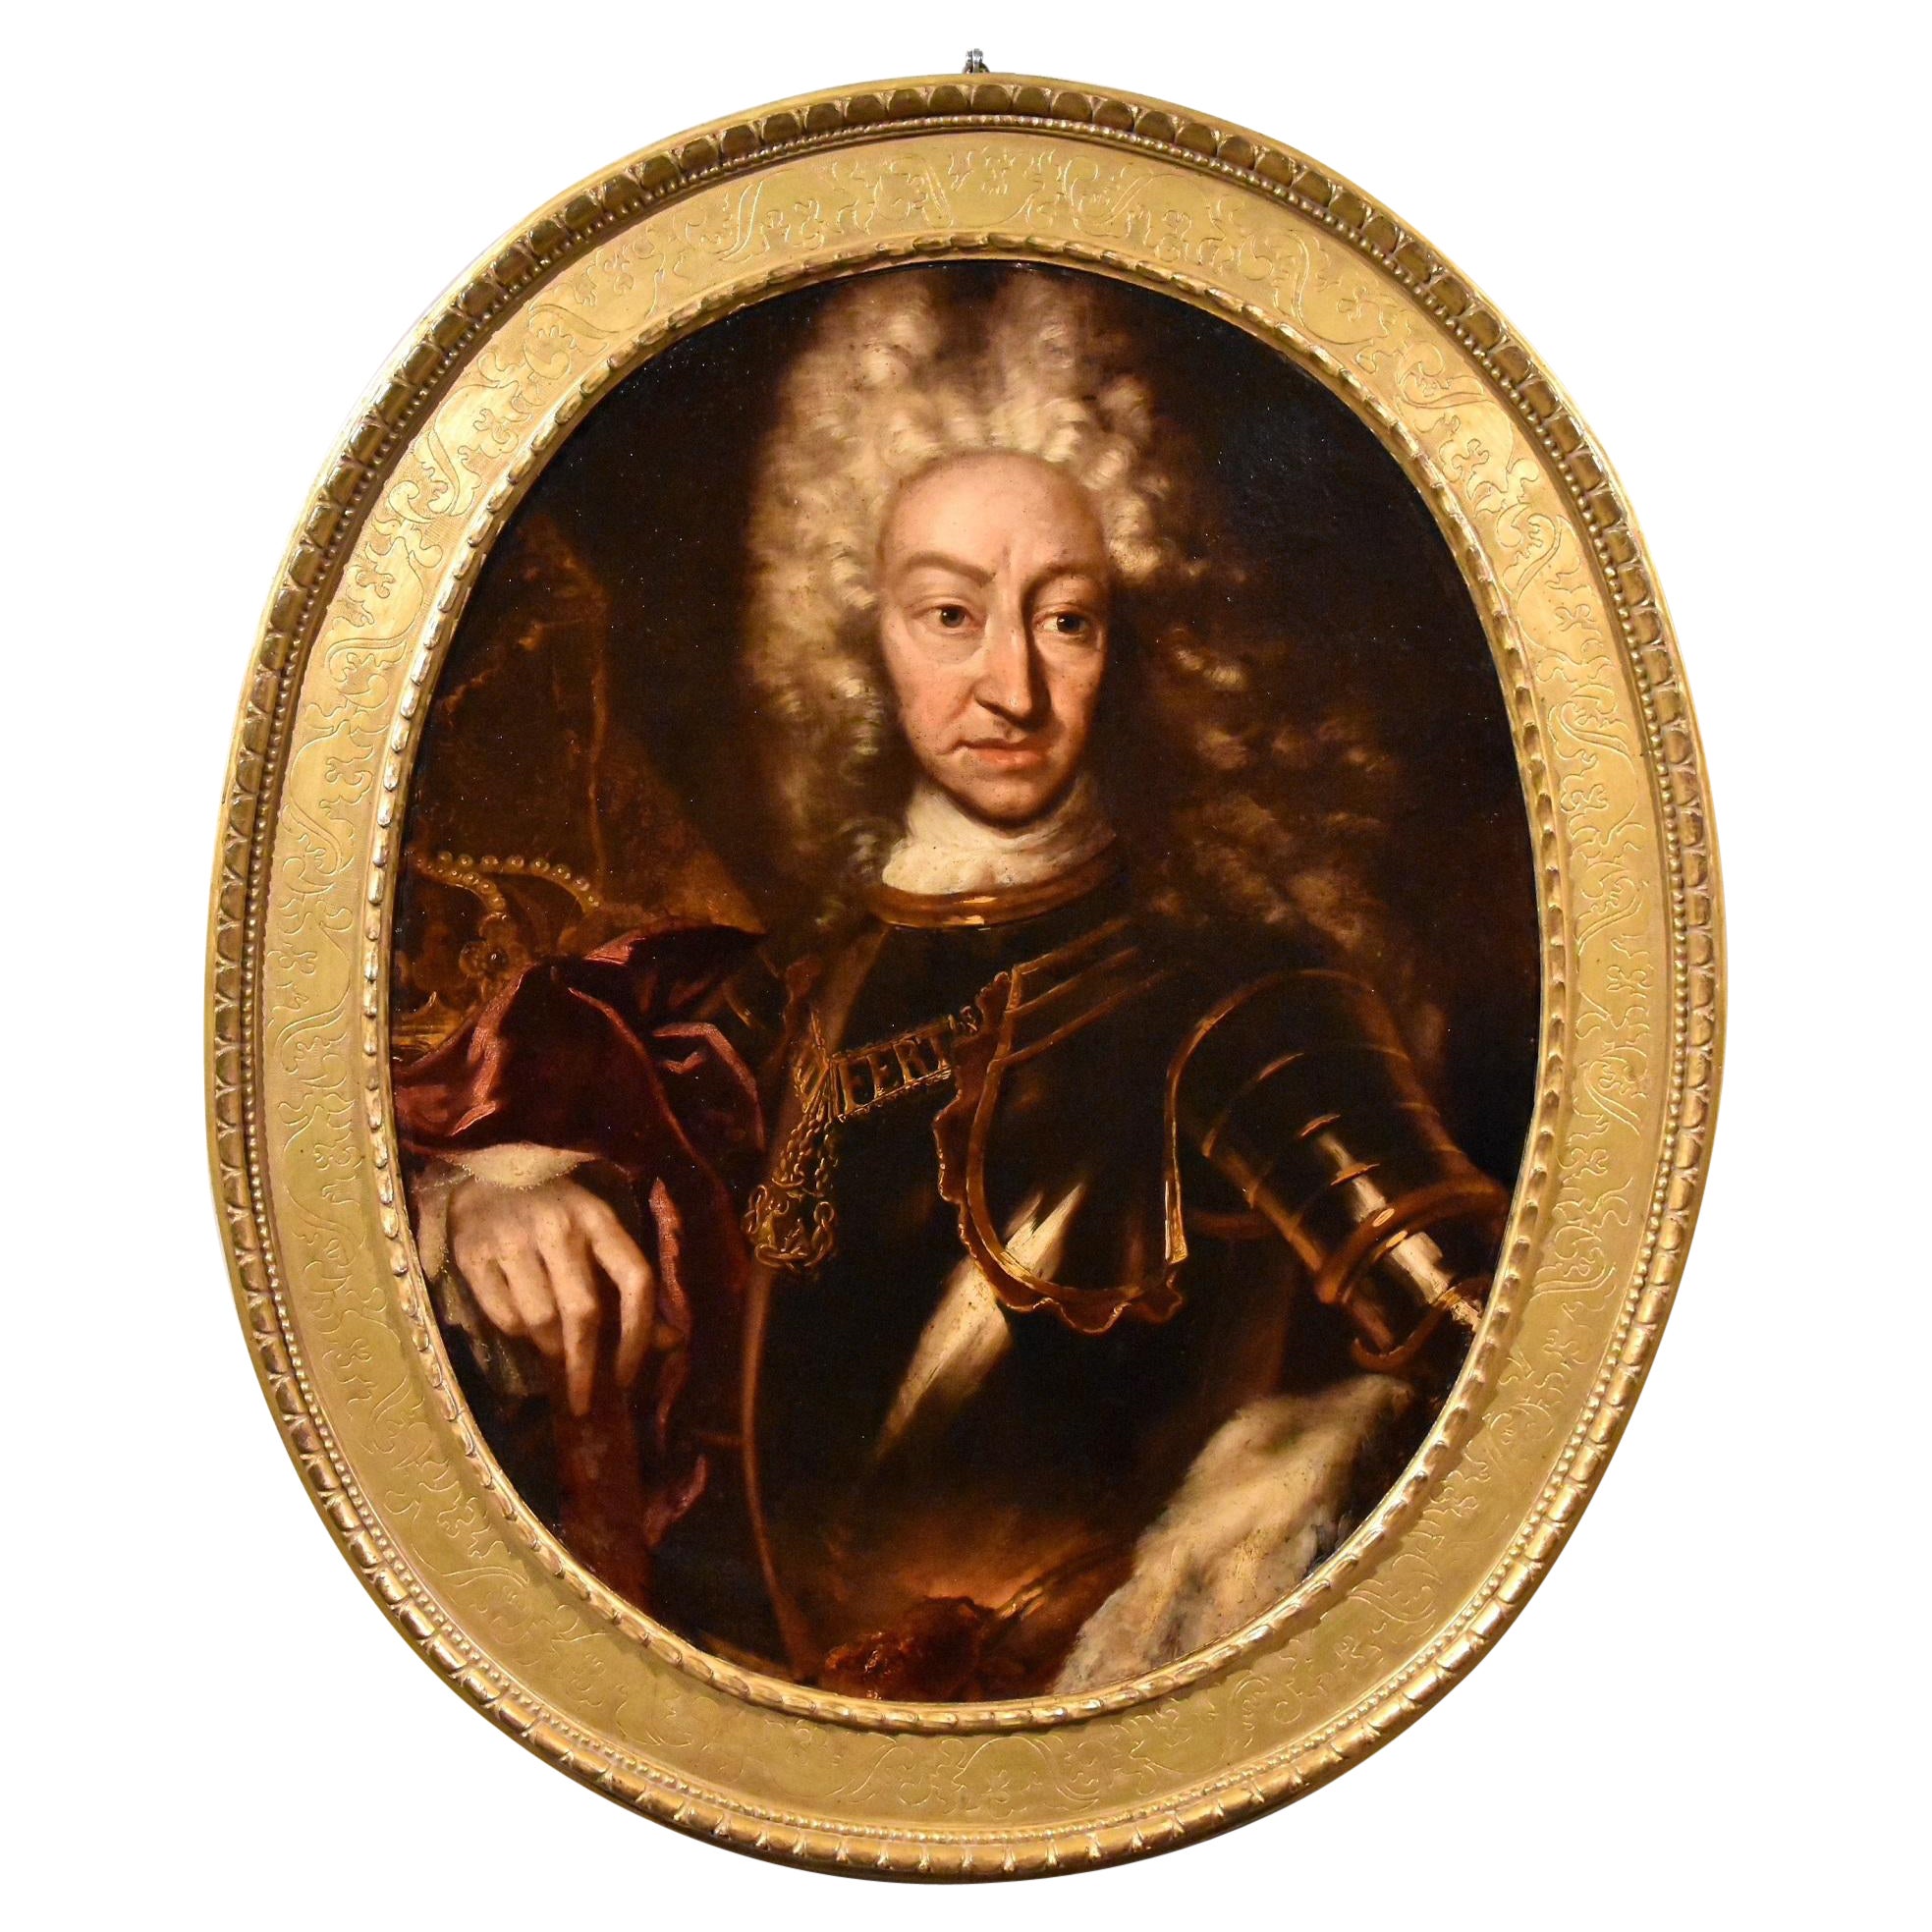 King Portrait Clementi Paint Oil on canvas Old master 18th Century Italian  - Painting by Maria Giovanna Battista Clementi known as La Clementina (Turin, 1692 - Turin, 1761)